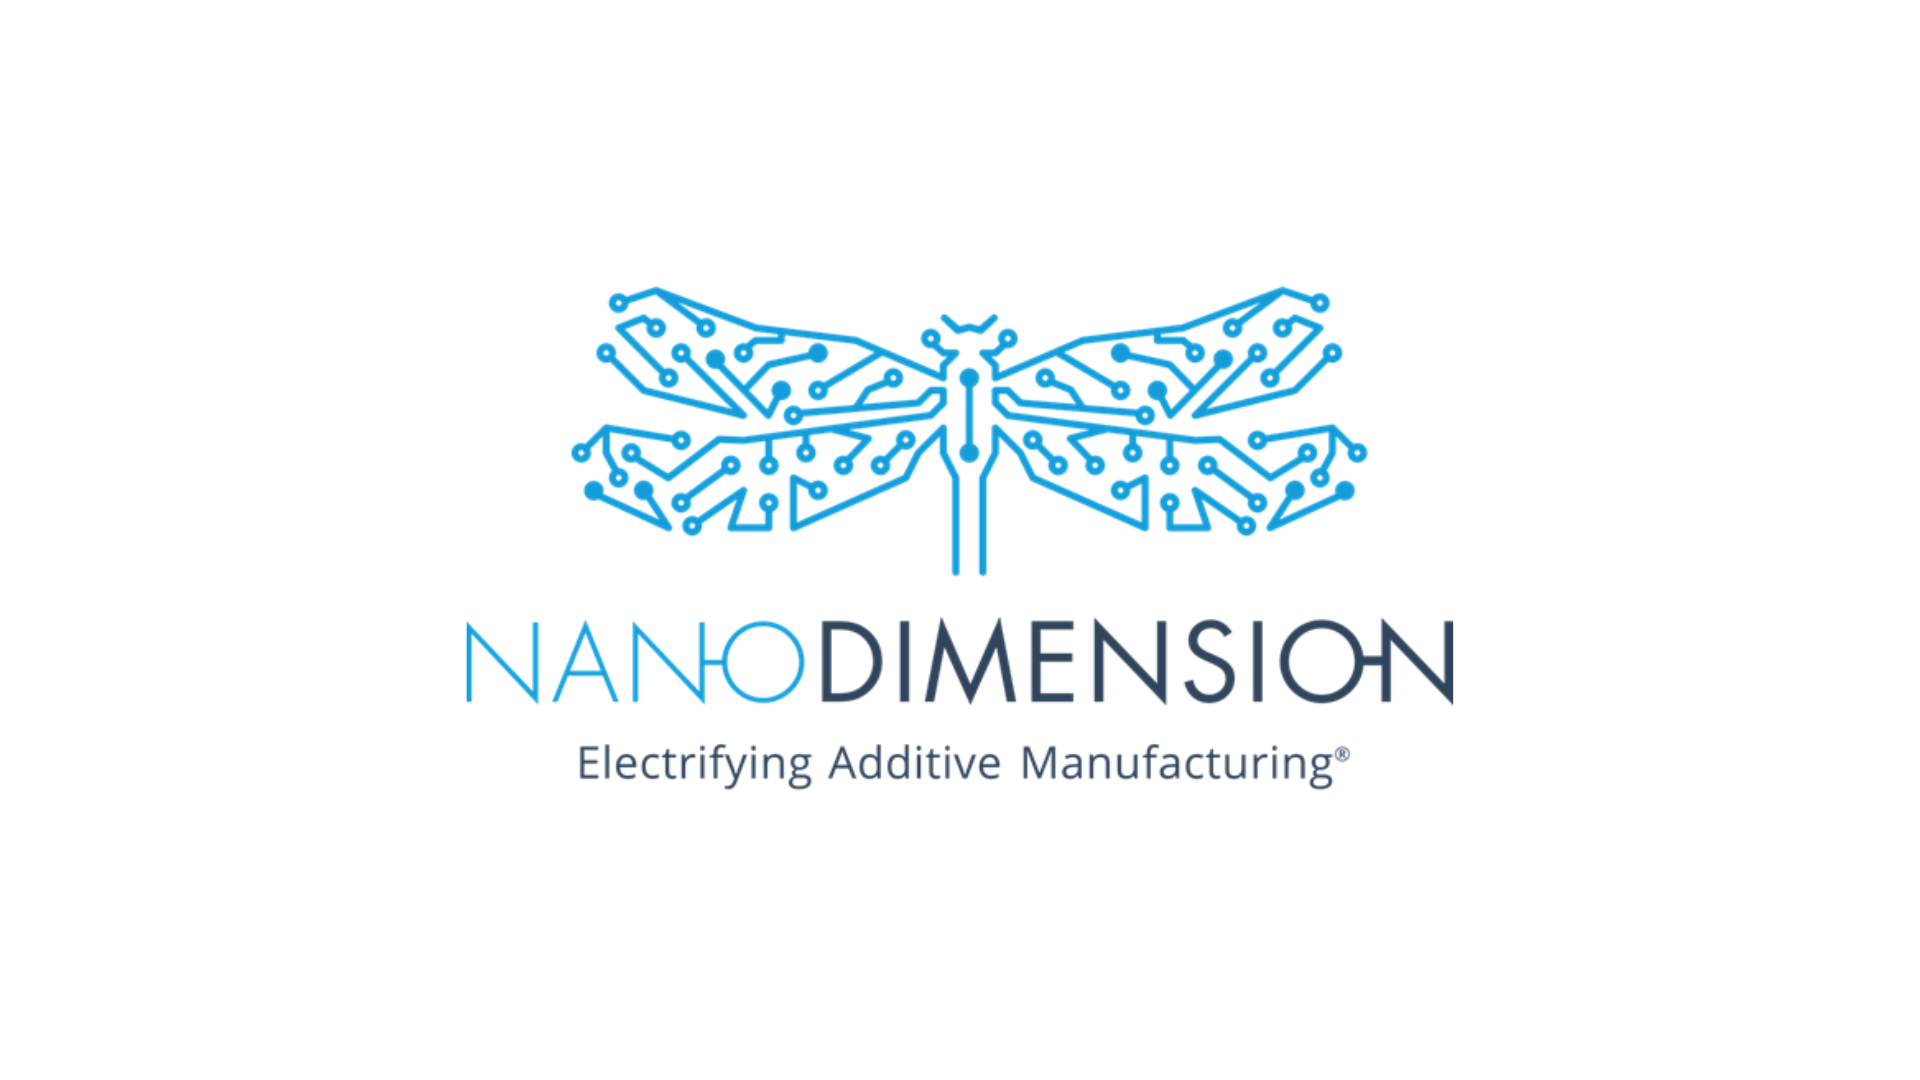 Nano Dimension delivered the Admaflex130 Evolution its high precision ceramics and metal fabrication system to the KIT.